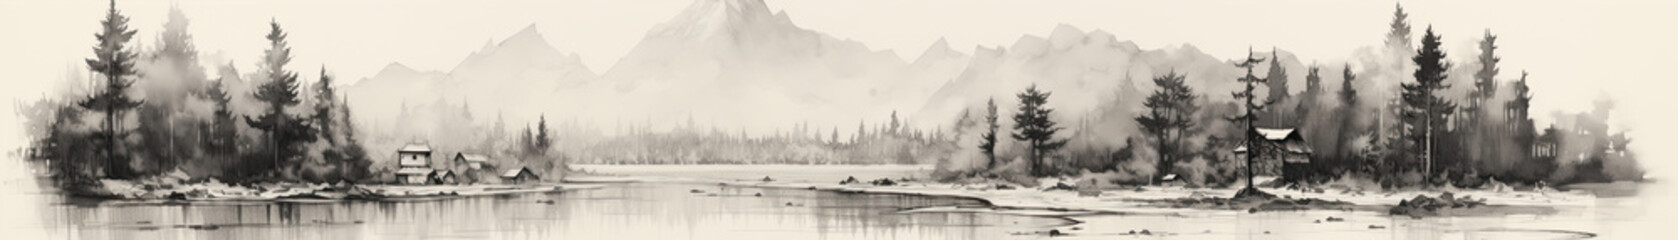 Black ink paint of lake and mountains. Oriental  minimalistic Japanese illustrative style. copyspace for your text.